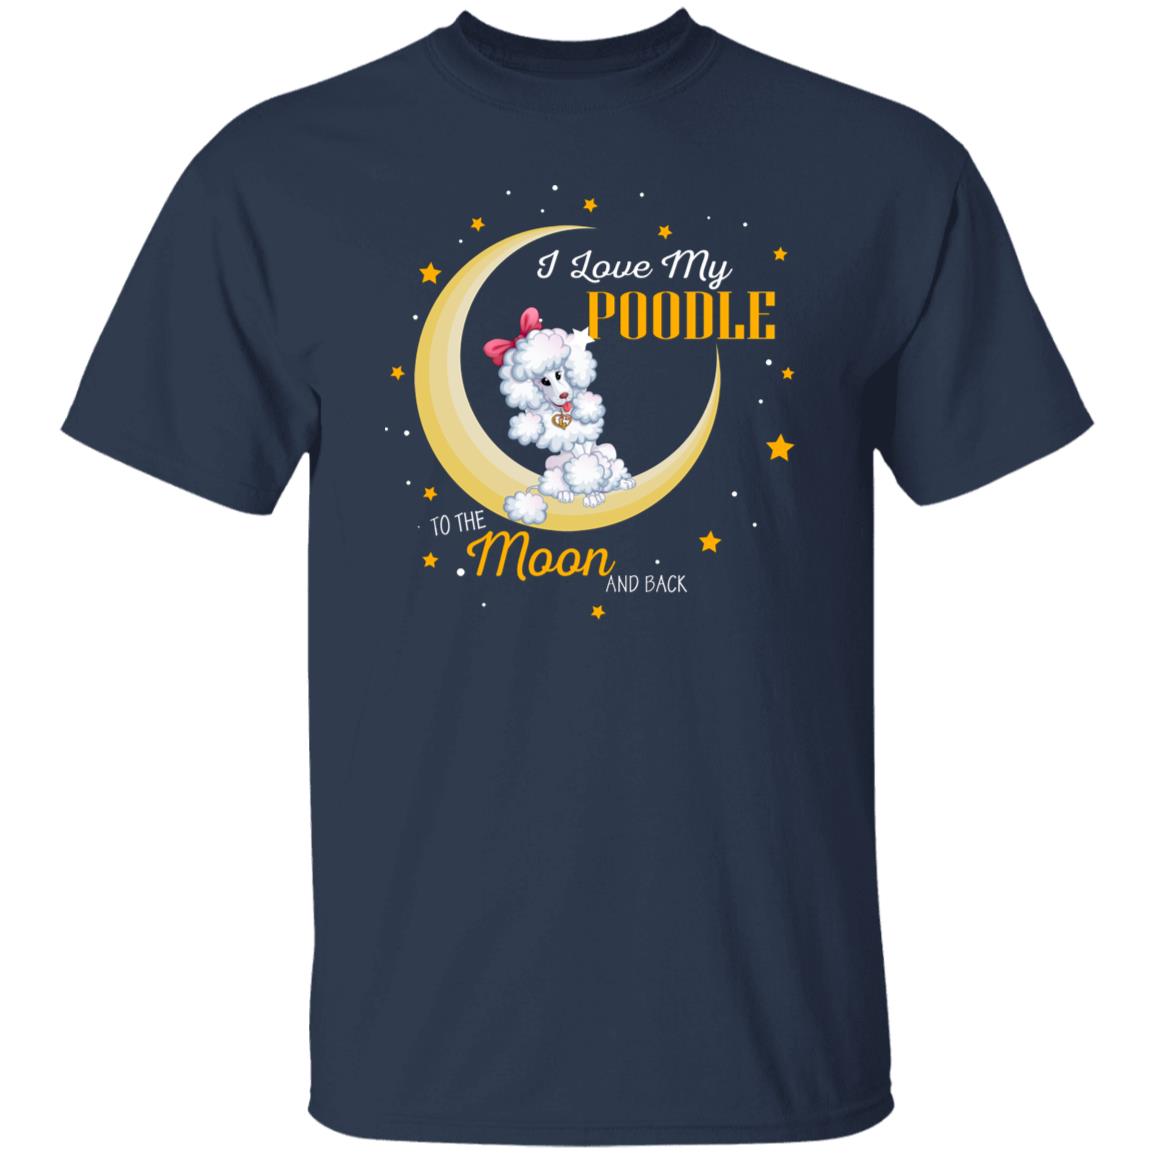 I love my poodle to the moon and back Unisex t-shirt gift black navy dark heather-Family-Gift-Planet